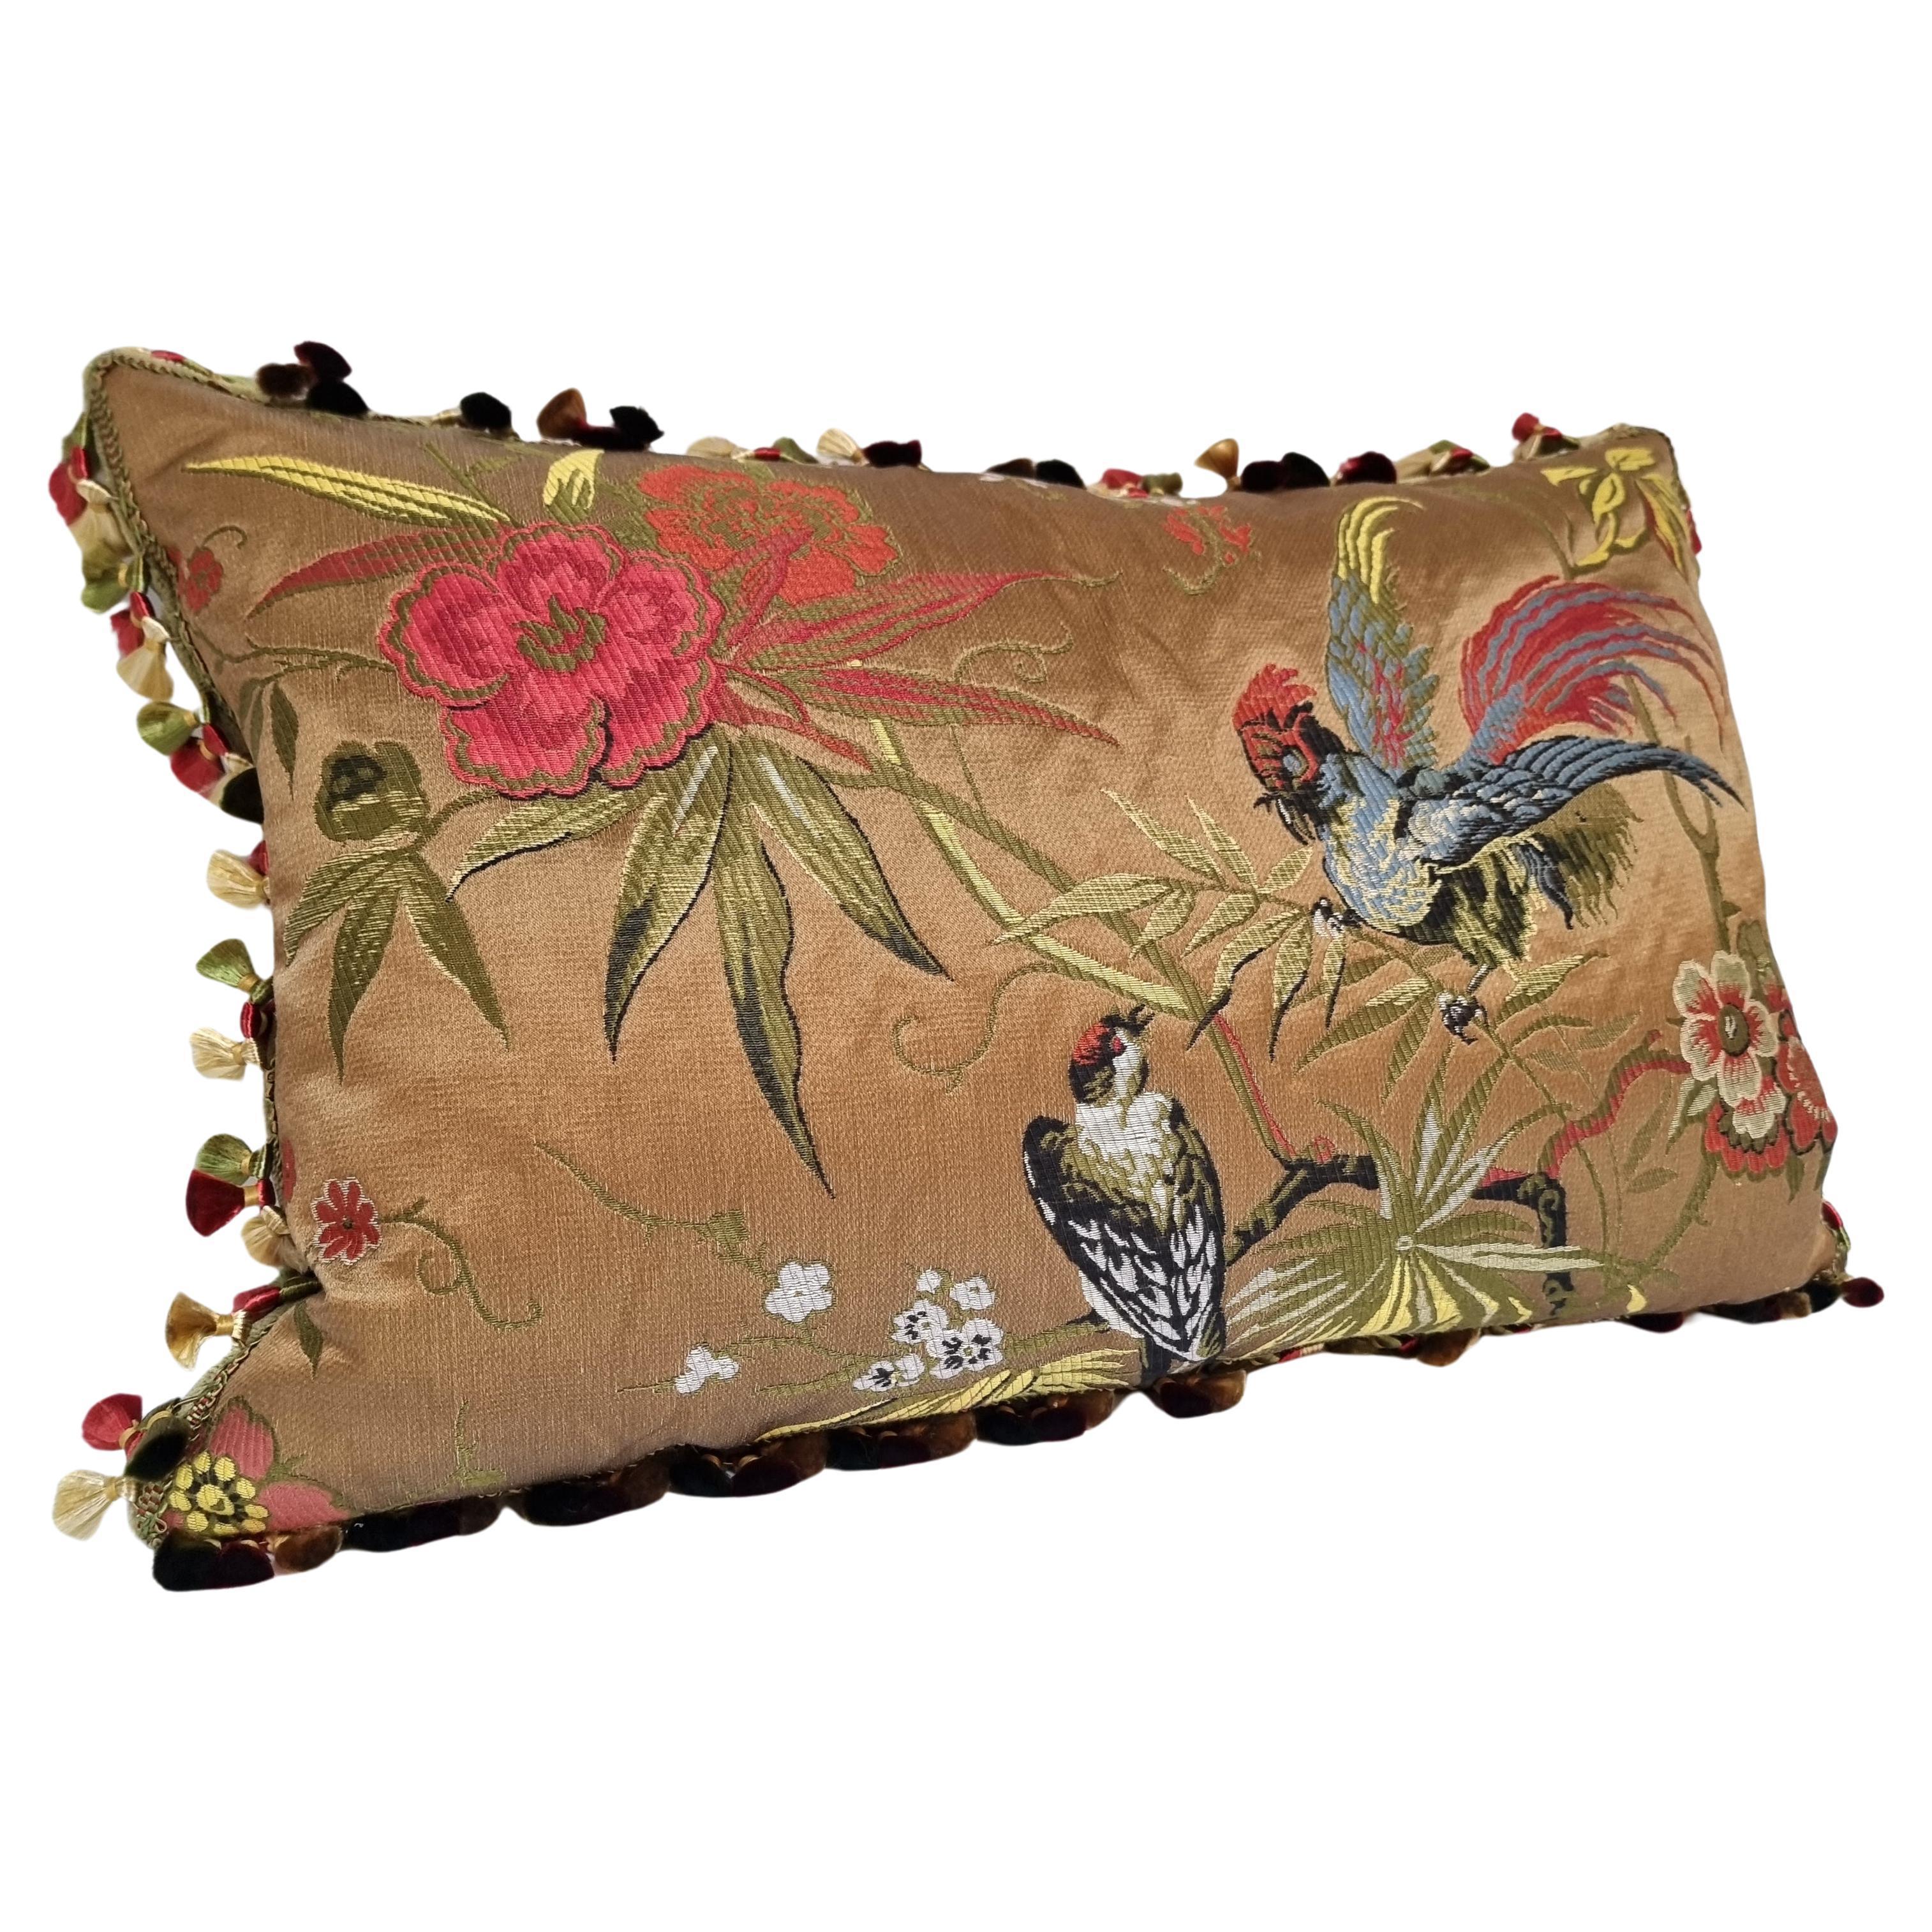 This amazing decorative lumbar pillow is handmade using the hazelnut brown Uccelli Lampas from 